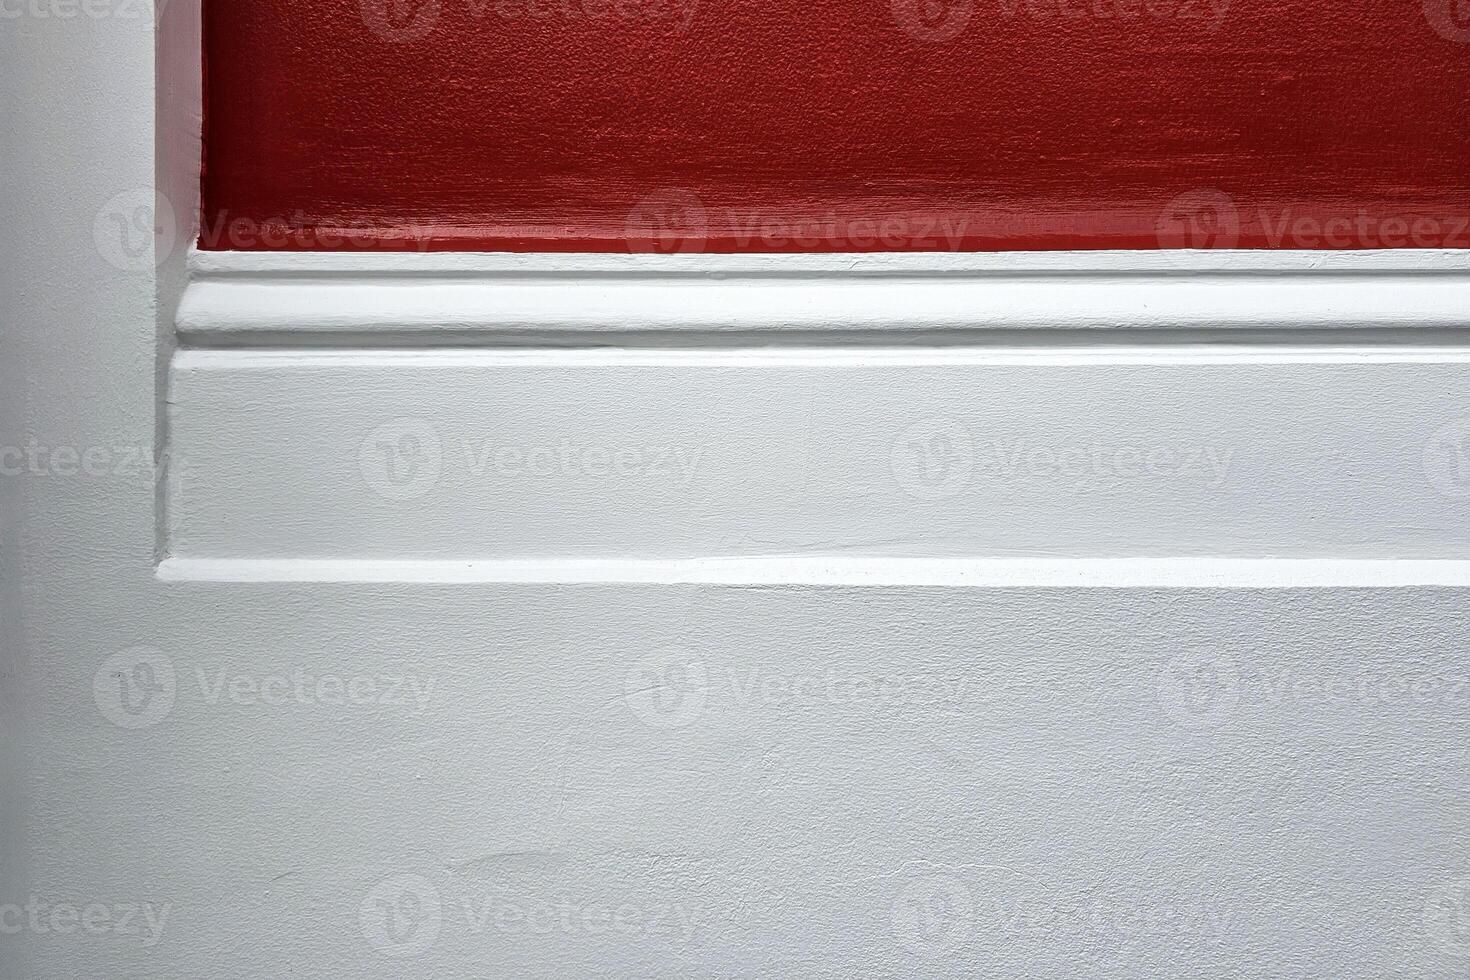 Minimal White and Red Painting Concrete Wall Texture for Background. photo